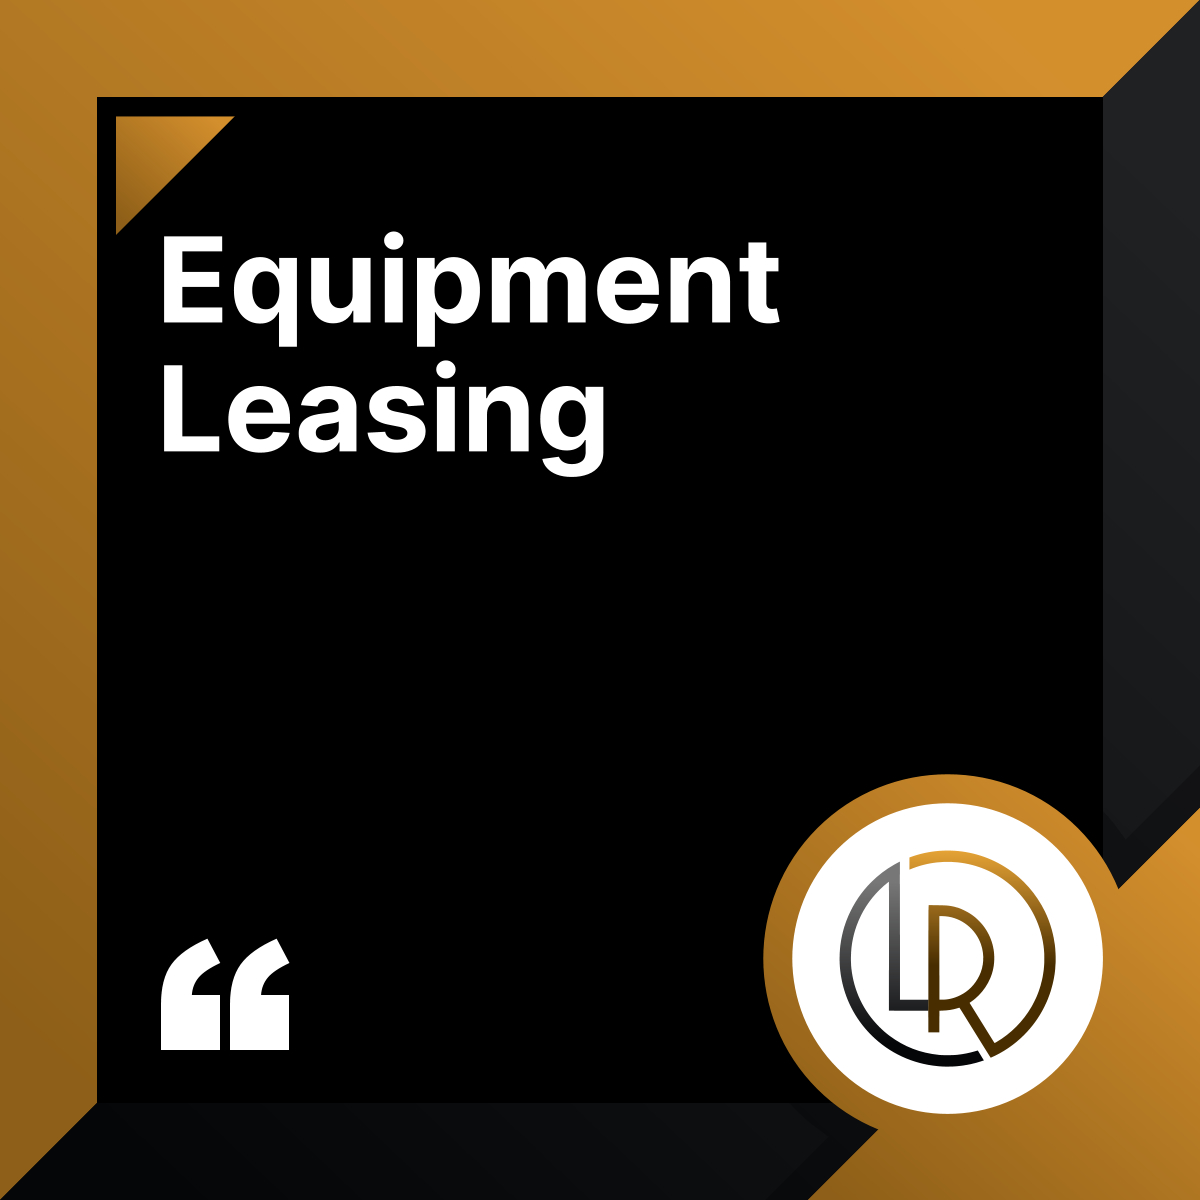 Our mission is to propel the growth of the trucking industry and equipment leasing companies. Reach out to us today to see how we can accelerate your business and shift the gears in the investment world.

#EquipmentLeasing #Logistics #PittsburghPA